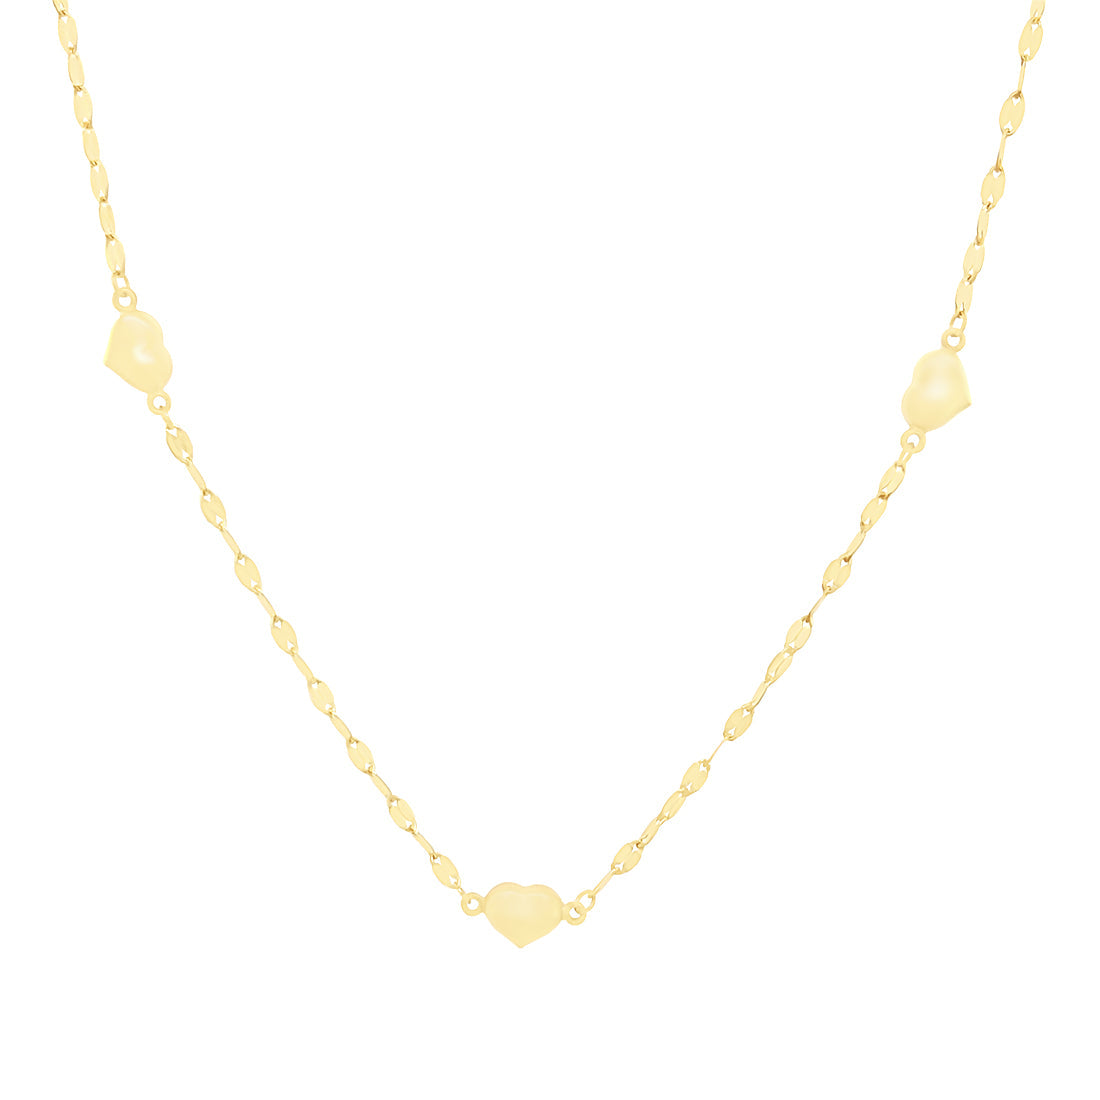 Heart Charm Necklace in 9ct Yellow Gold Silver Infused 45cm Necklaces Bevilles 